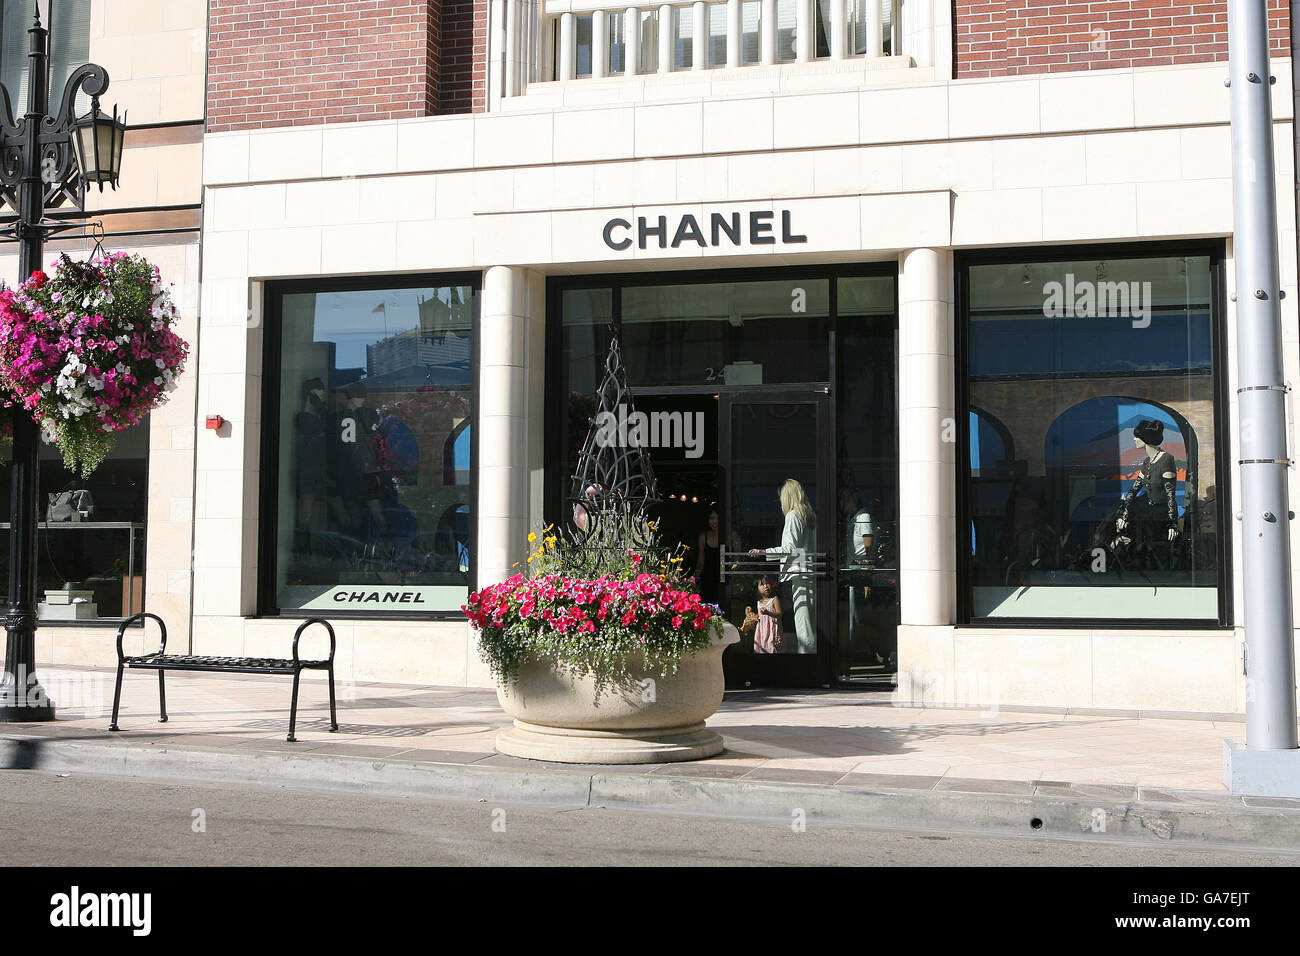 The Chanel shop on Rodeo Drive in Hollywood Stock Photo - Alamy